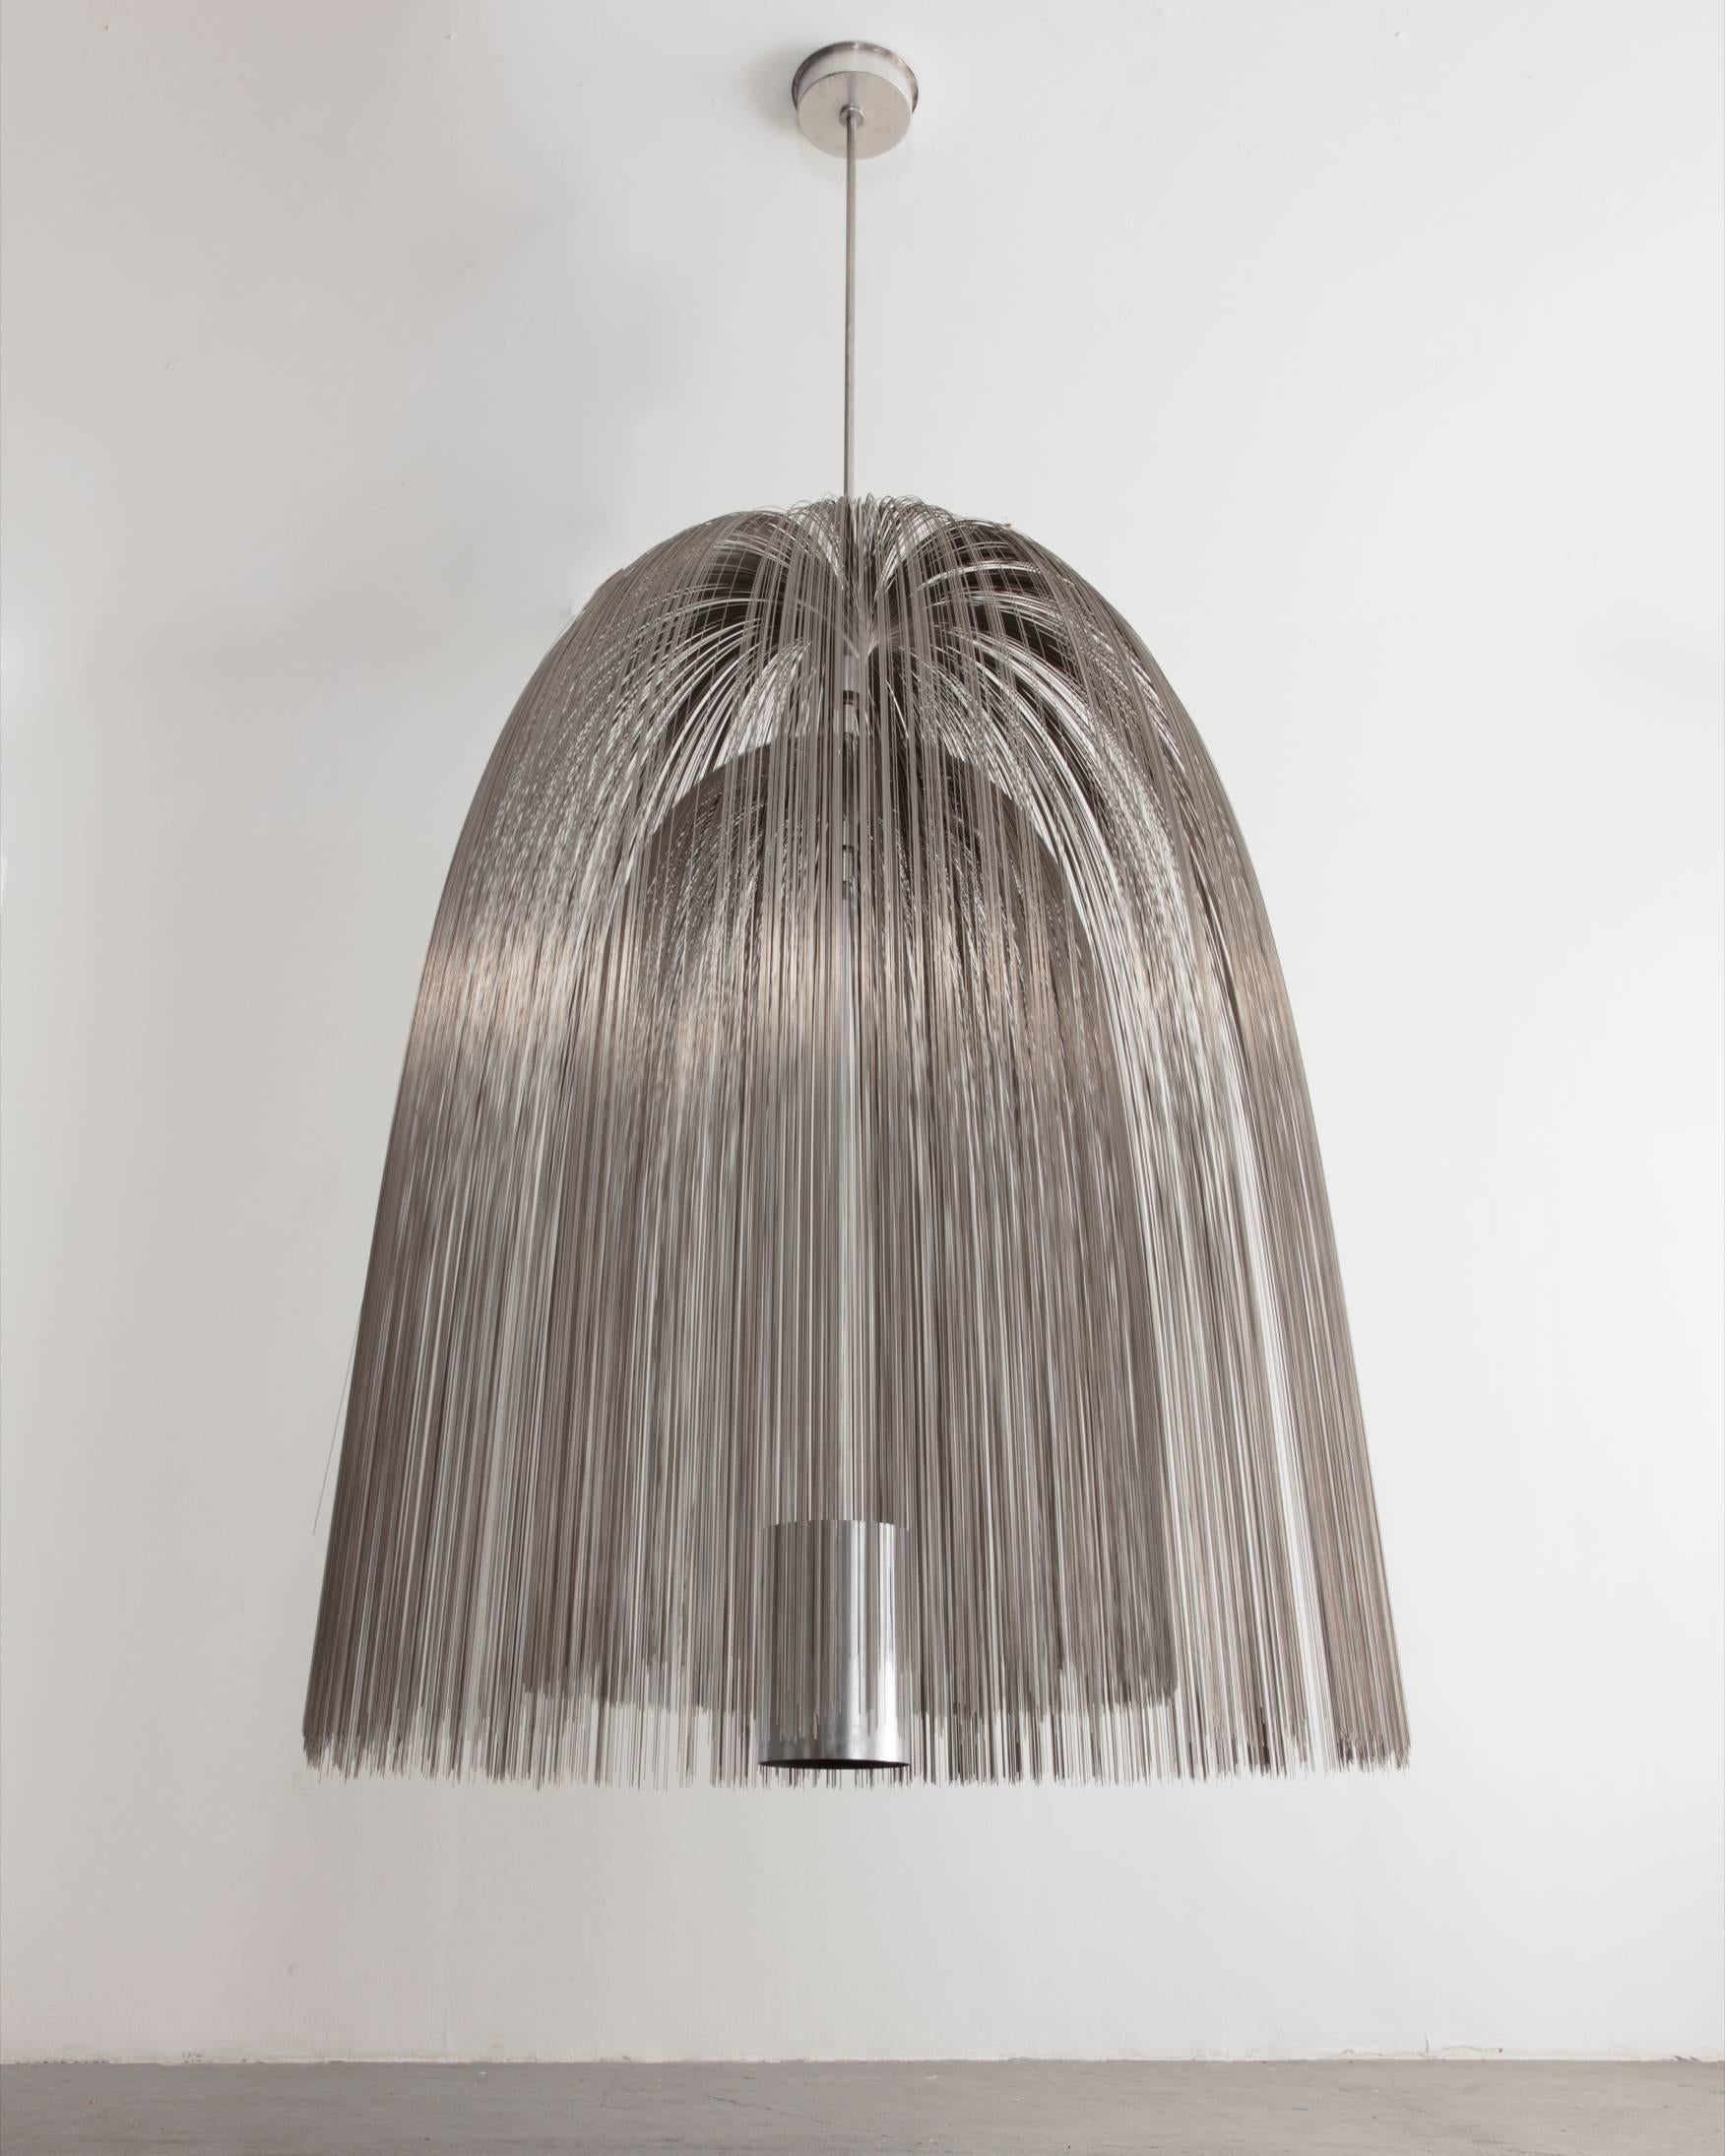 Harry Bertoia. Double hanging willow from the Seattle First National Bank, Seattle, Washington, 1968. Stainless steel.